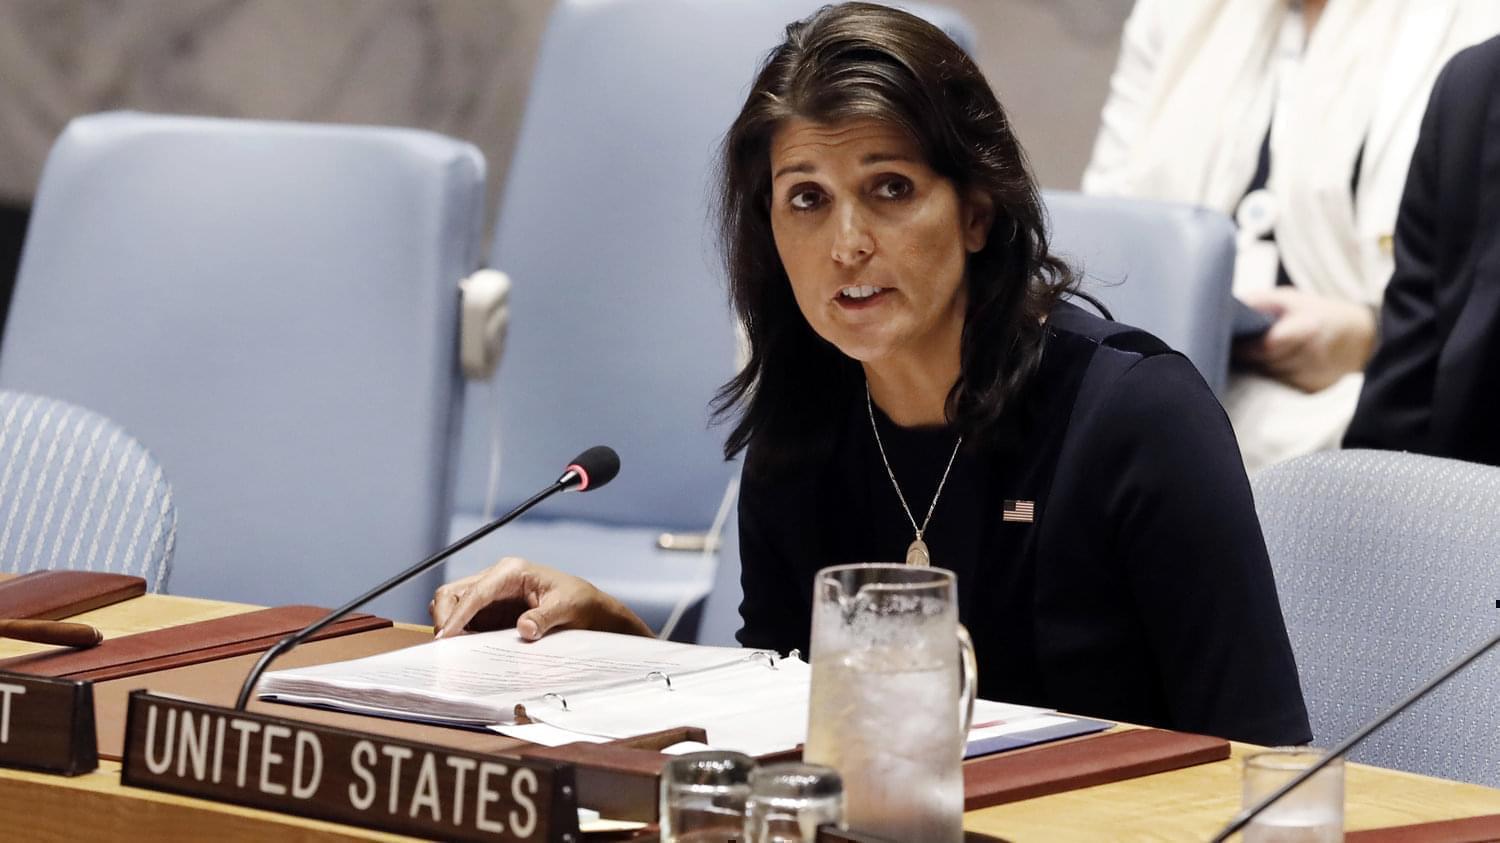 Nikki Haley at the United Nations in New York.